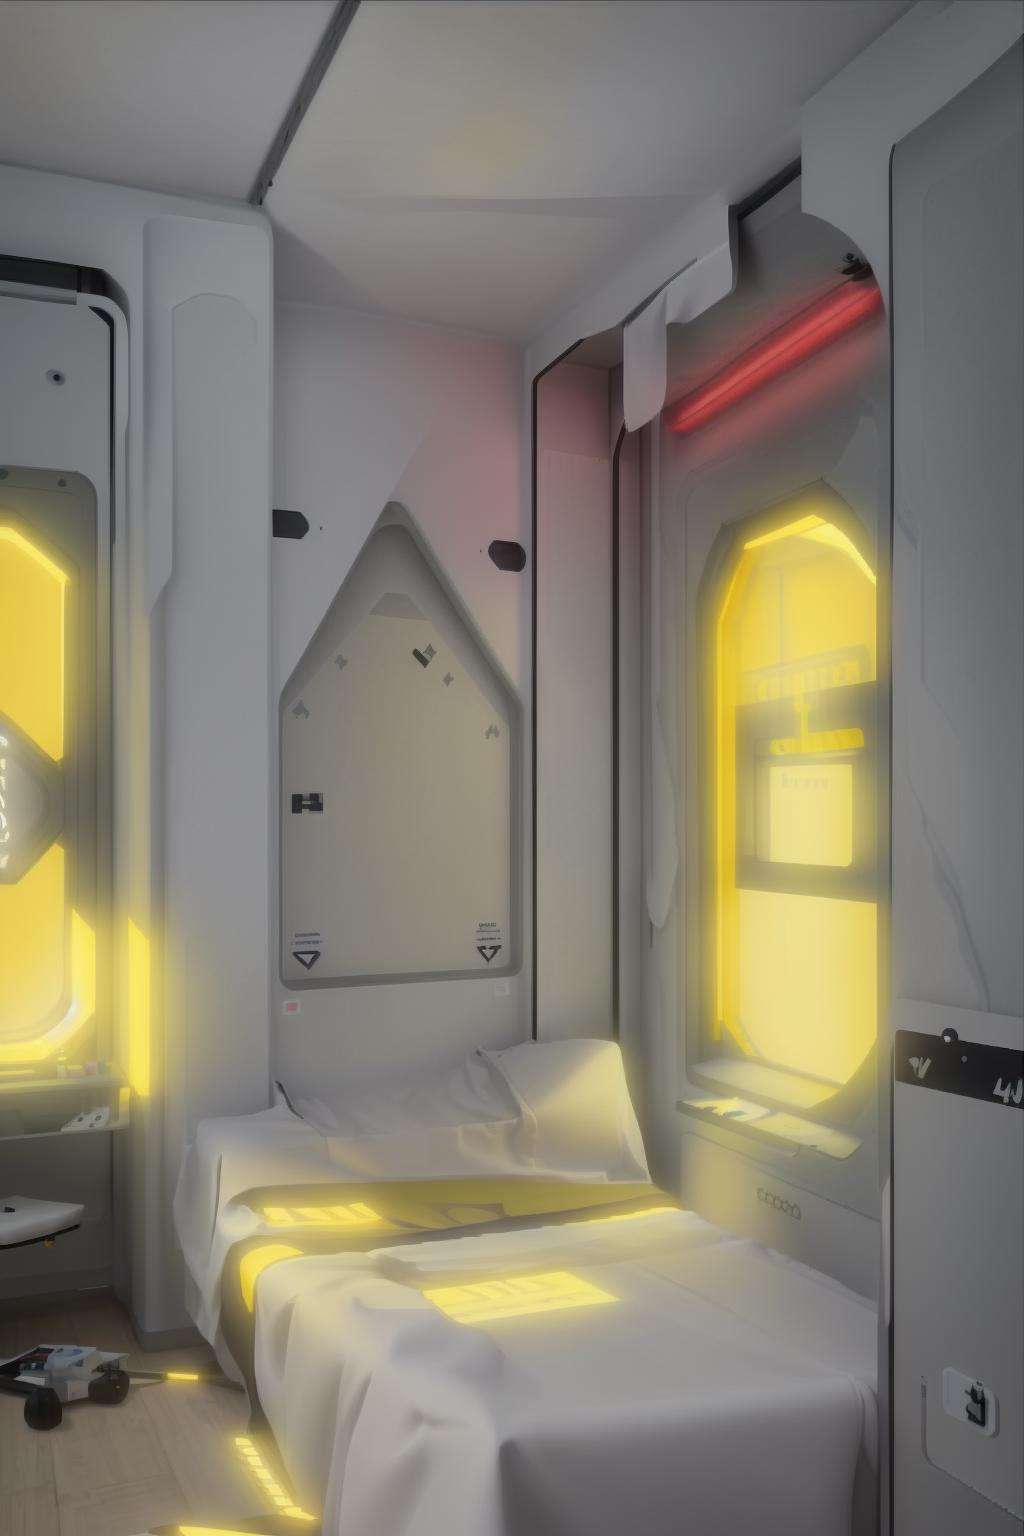 a room with a large window and a bed in it with a white sheet on the floor and a yellow line on the wall, Filip Hodas, cgstudio, computer graphics, space art , cyber_room  , cyberpunk ambient, a room